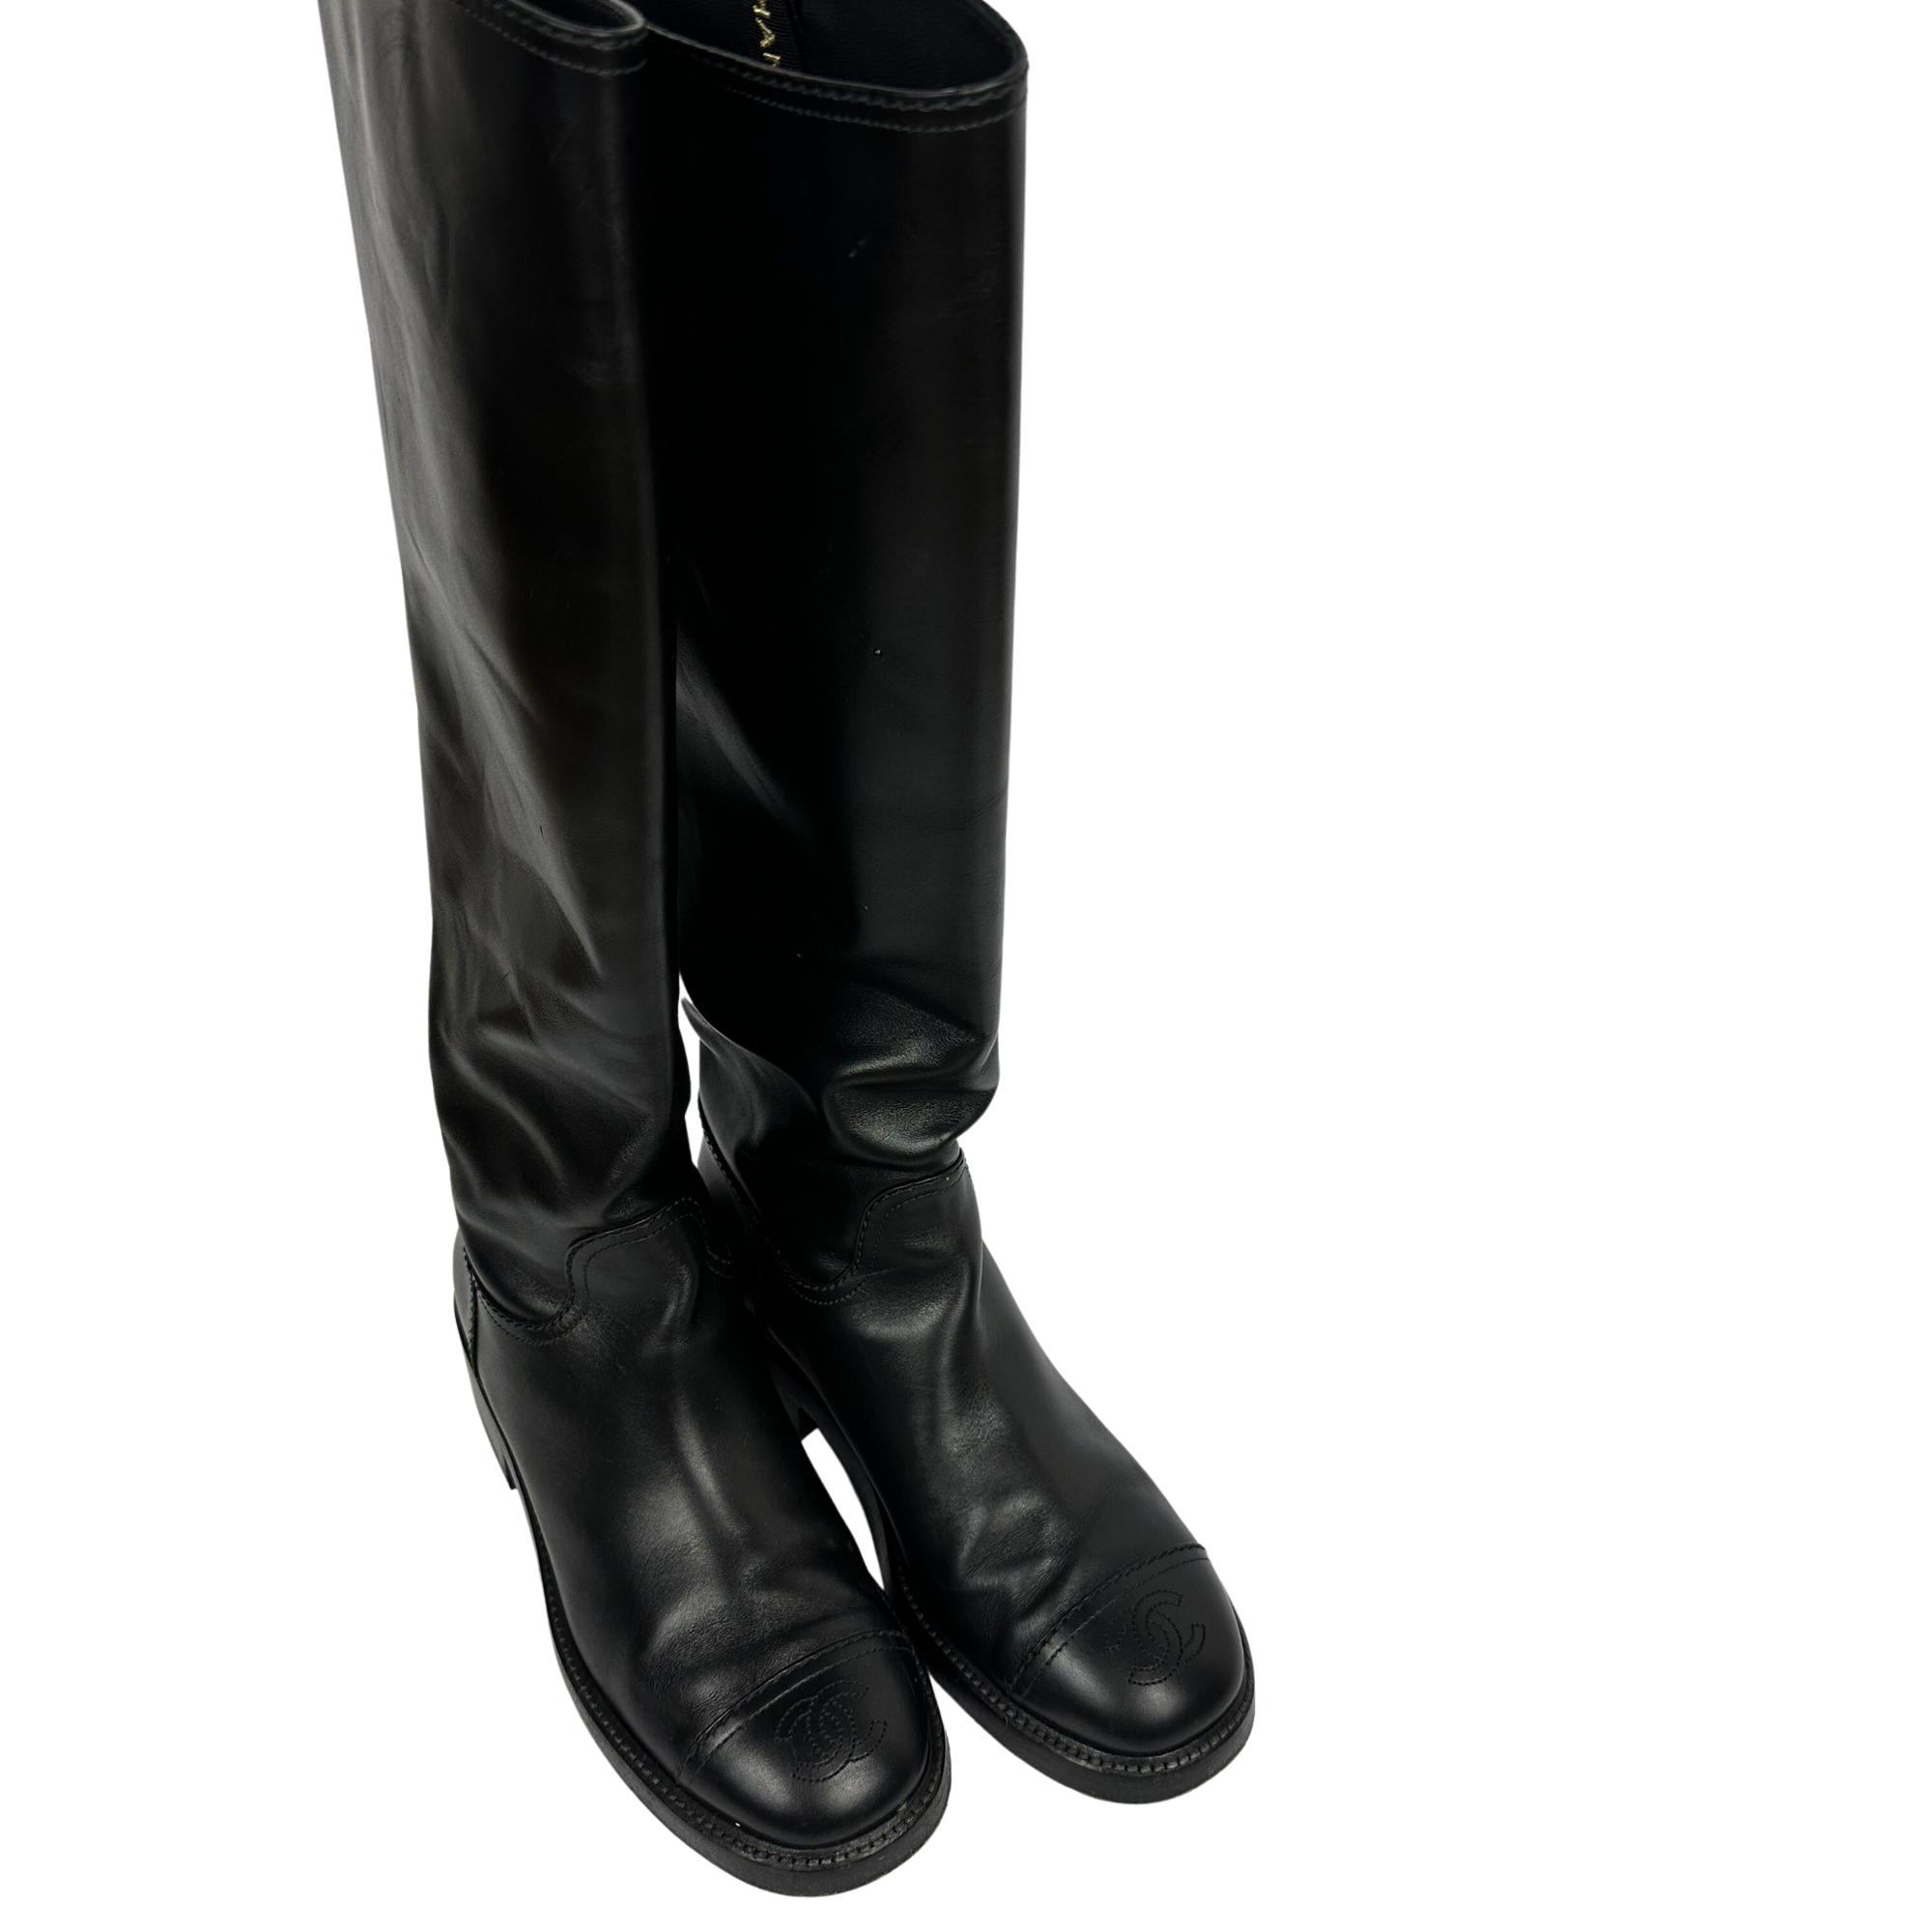 Chanel Riding Boots